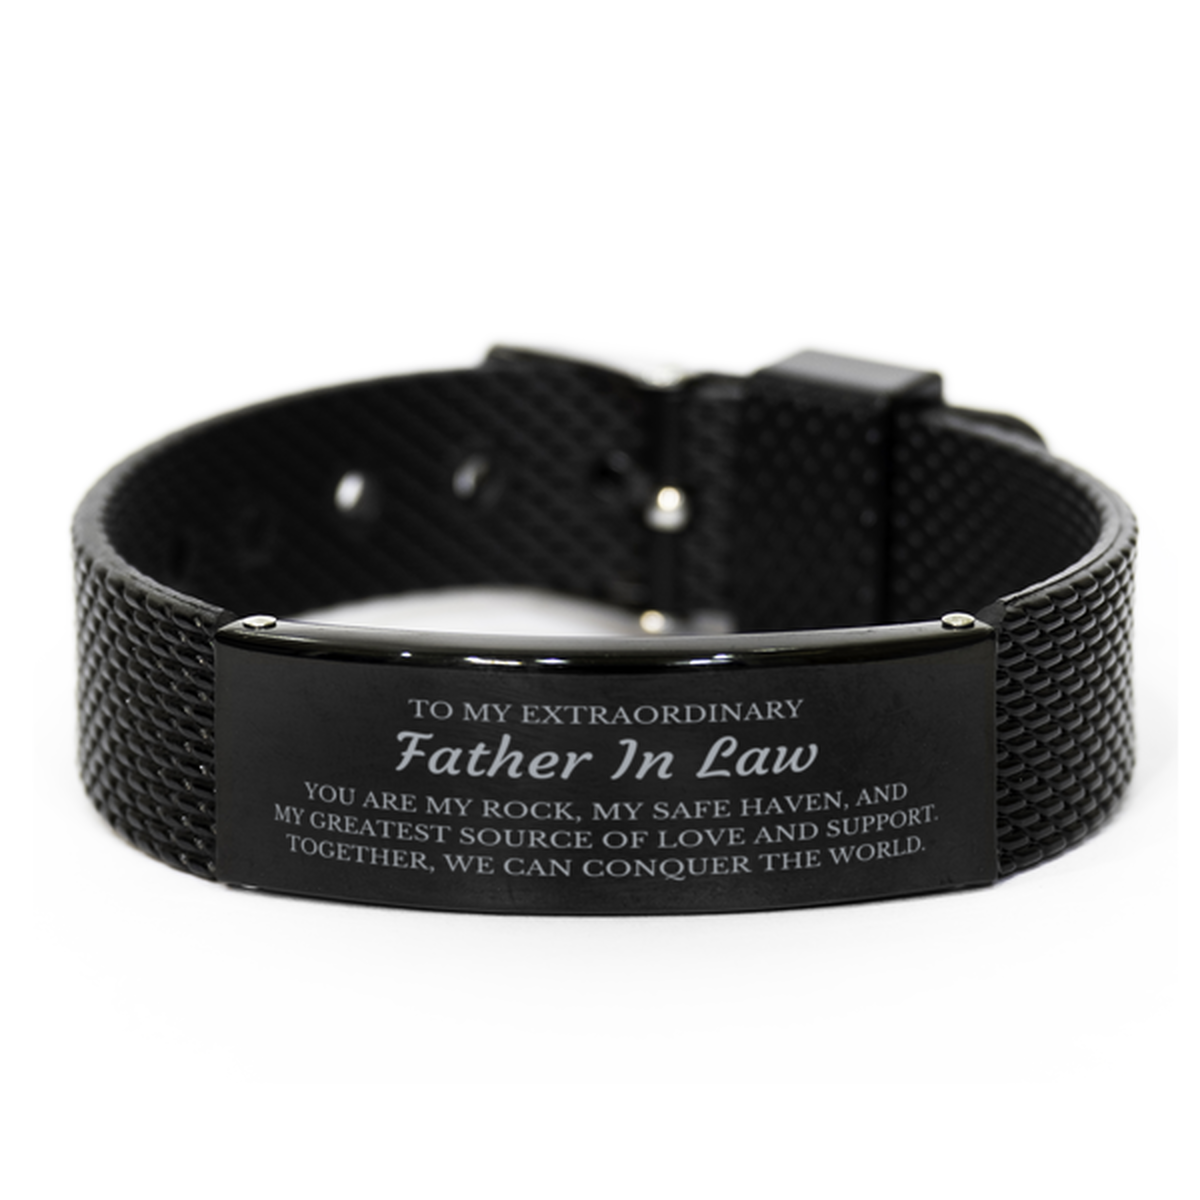 To My Extraordinary Father In Law Gifts, Together, we can conquer the world, Birthday Black Shark Mesh Bracelet For Father In Law, Christmas Gifts For Father In Law